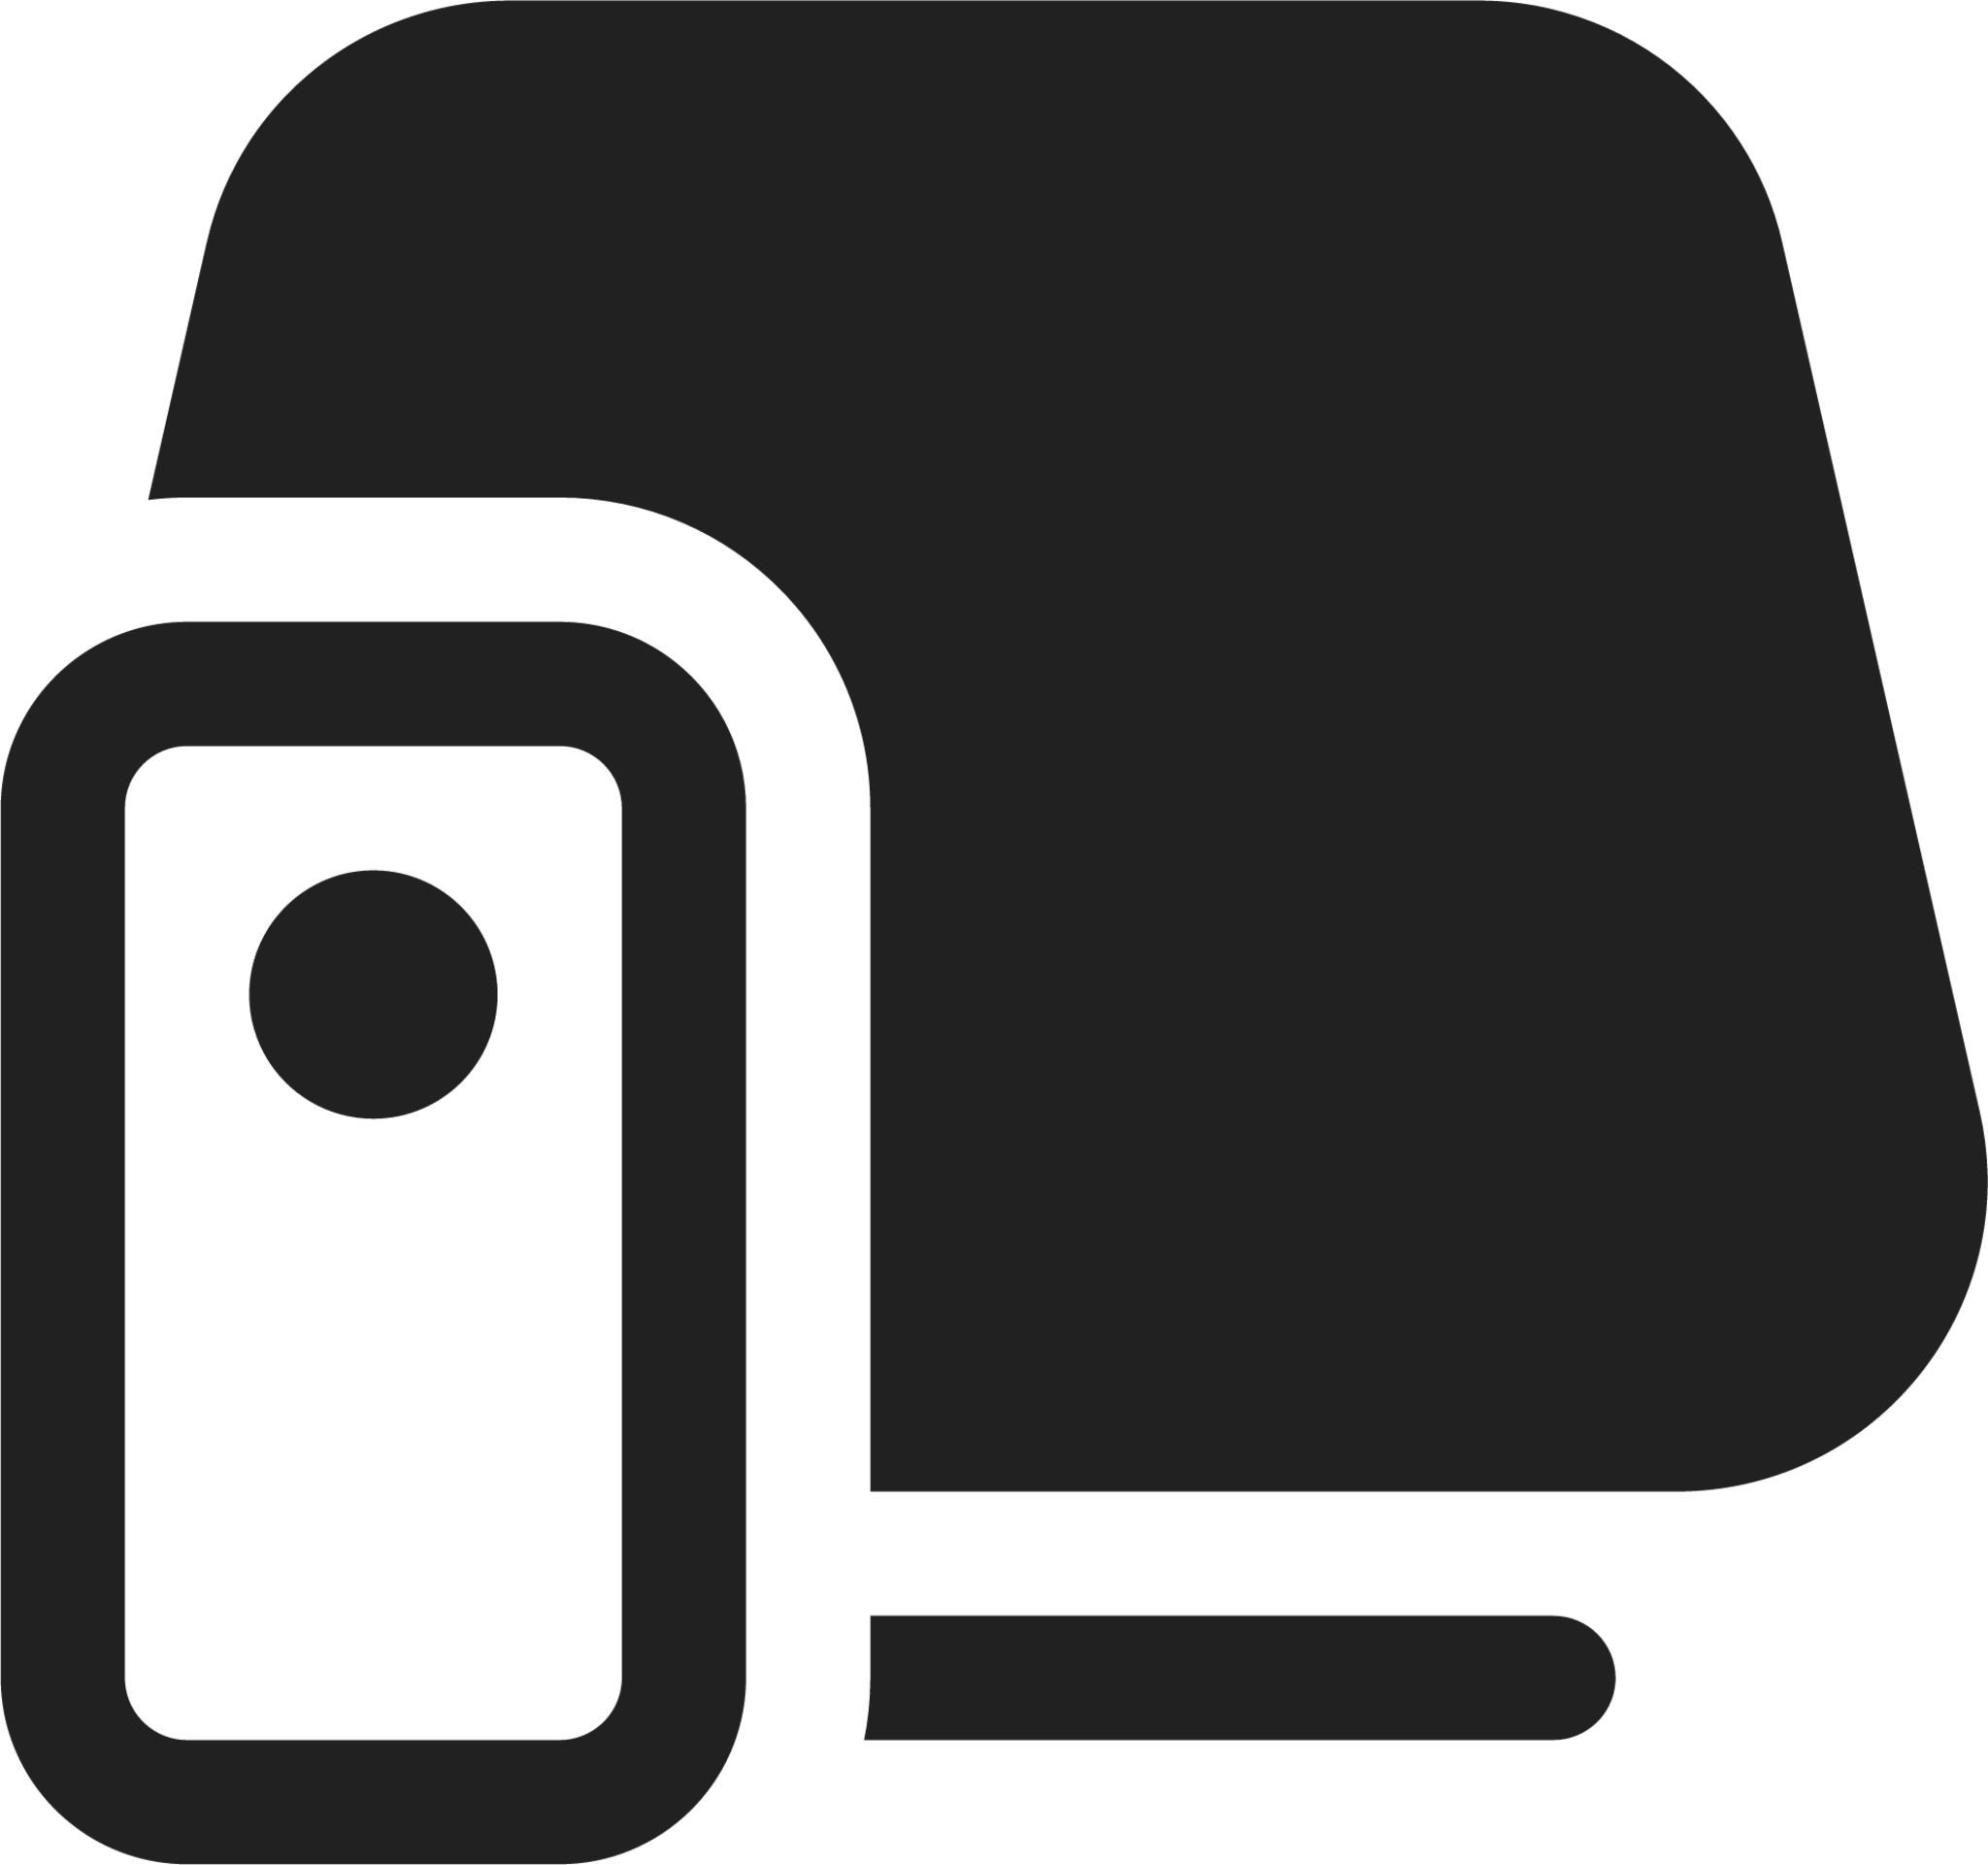 Device Meeting Room Remote icon